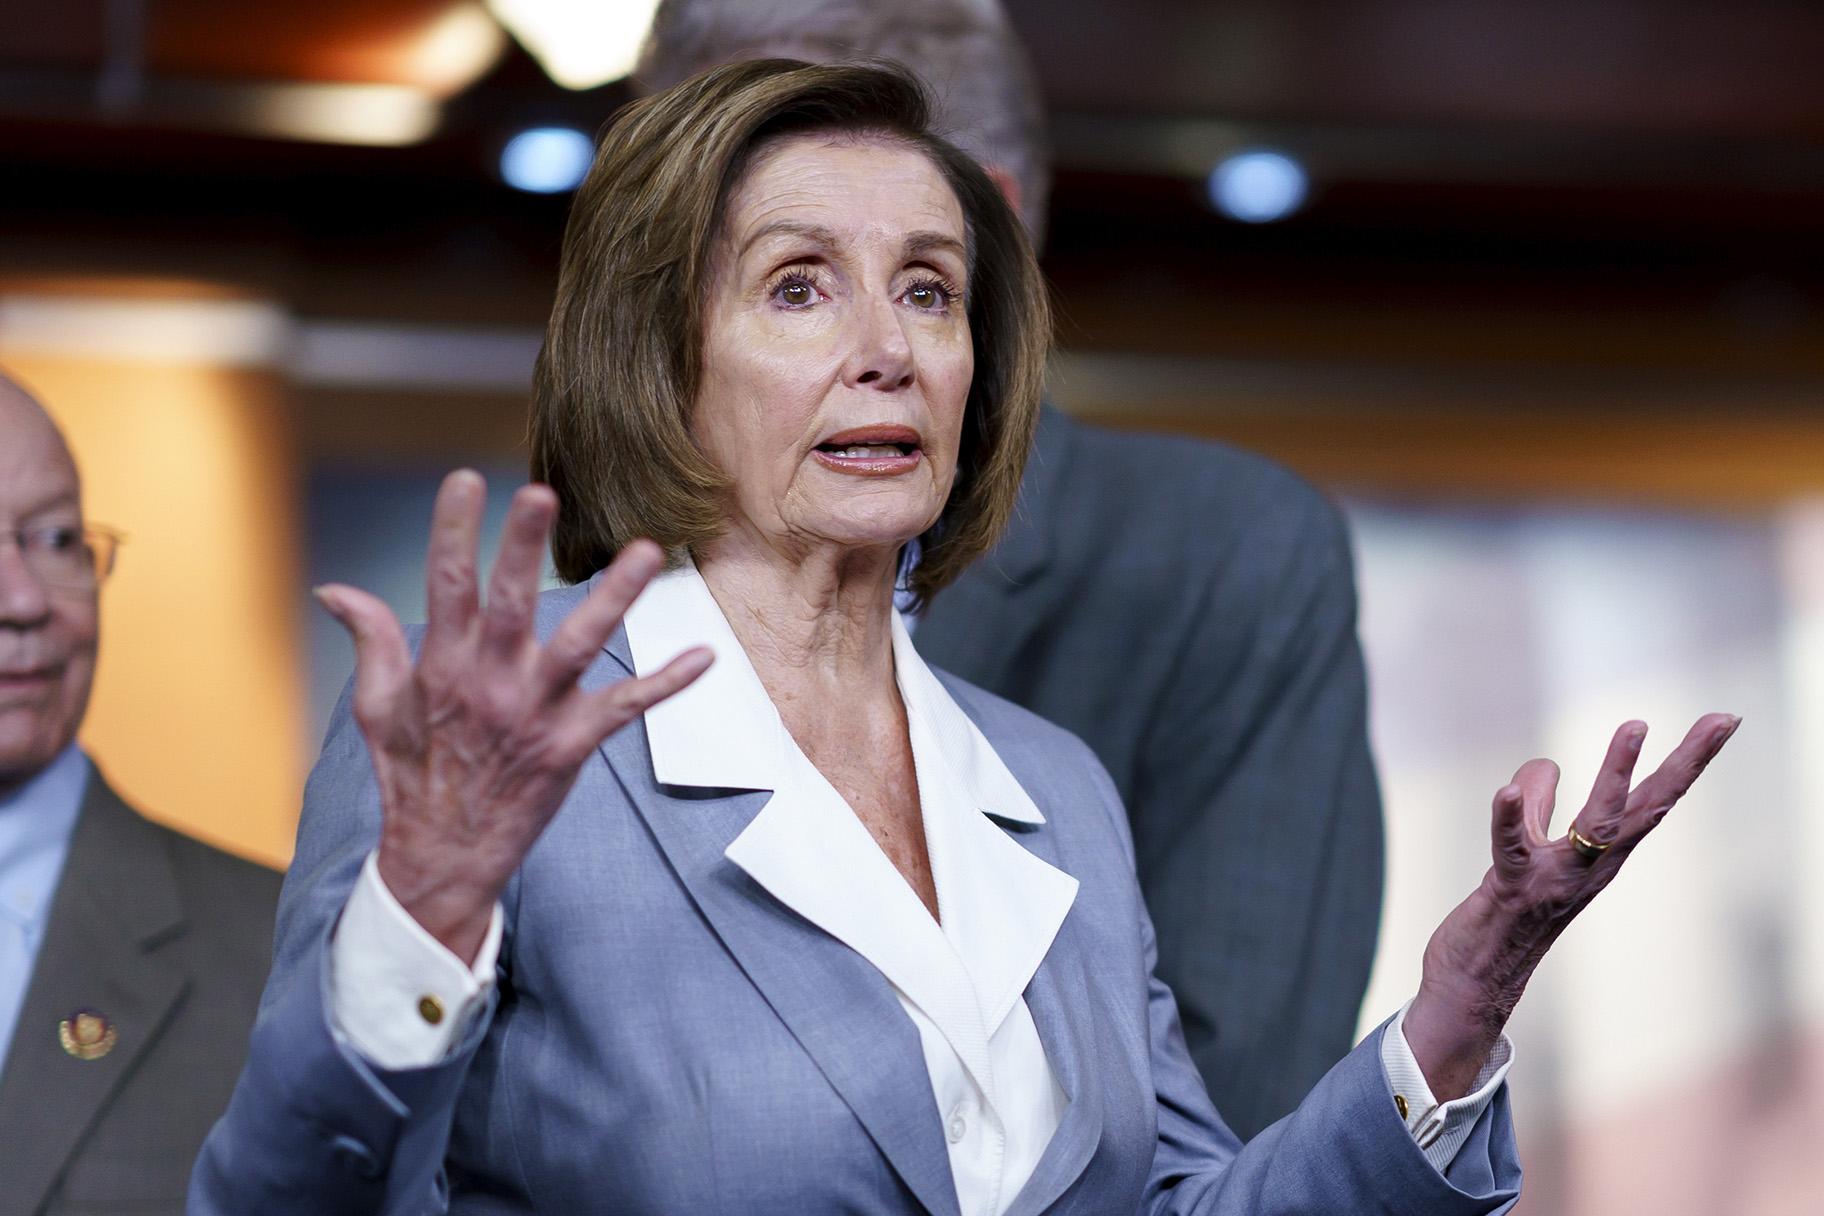 In this June 30, 2021 file photo, Speaker of the House Nancy Pelosi, D-Calif., responds to a question at a news conference as the House prepares to vote on the creation of a select committee to investigate the Jan. 6 insurrection, at the Capitol in Washington. (AP Photo / J. Scott Applewhite, File)